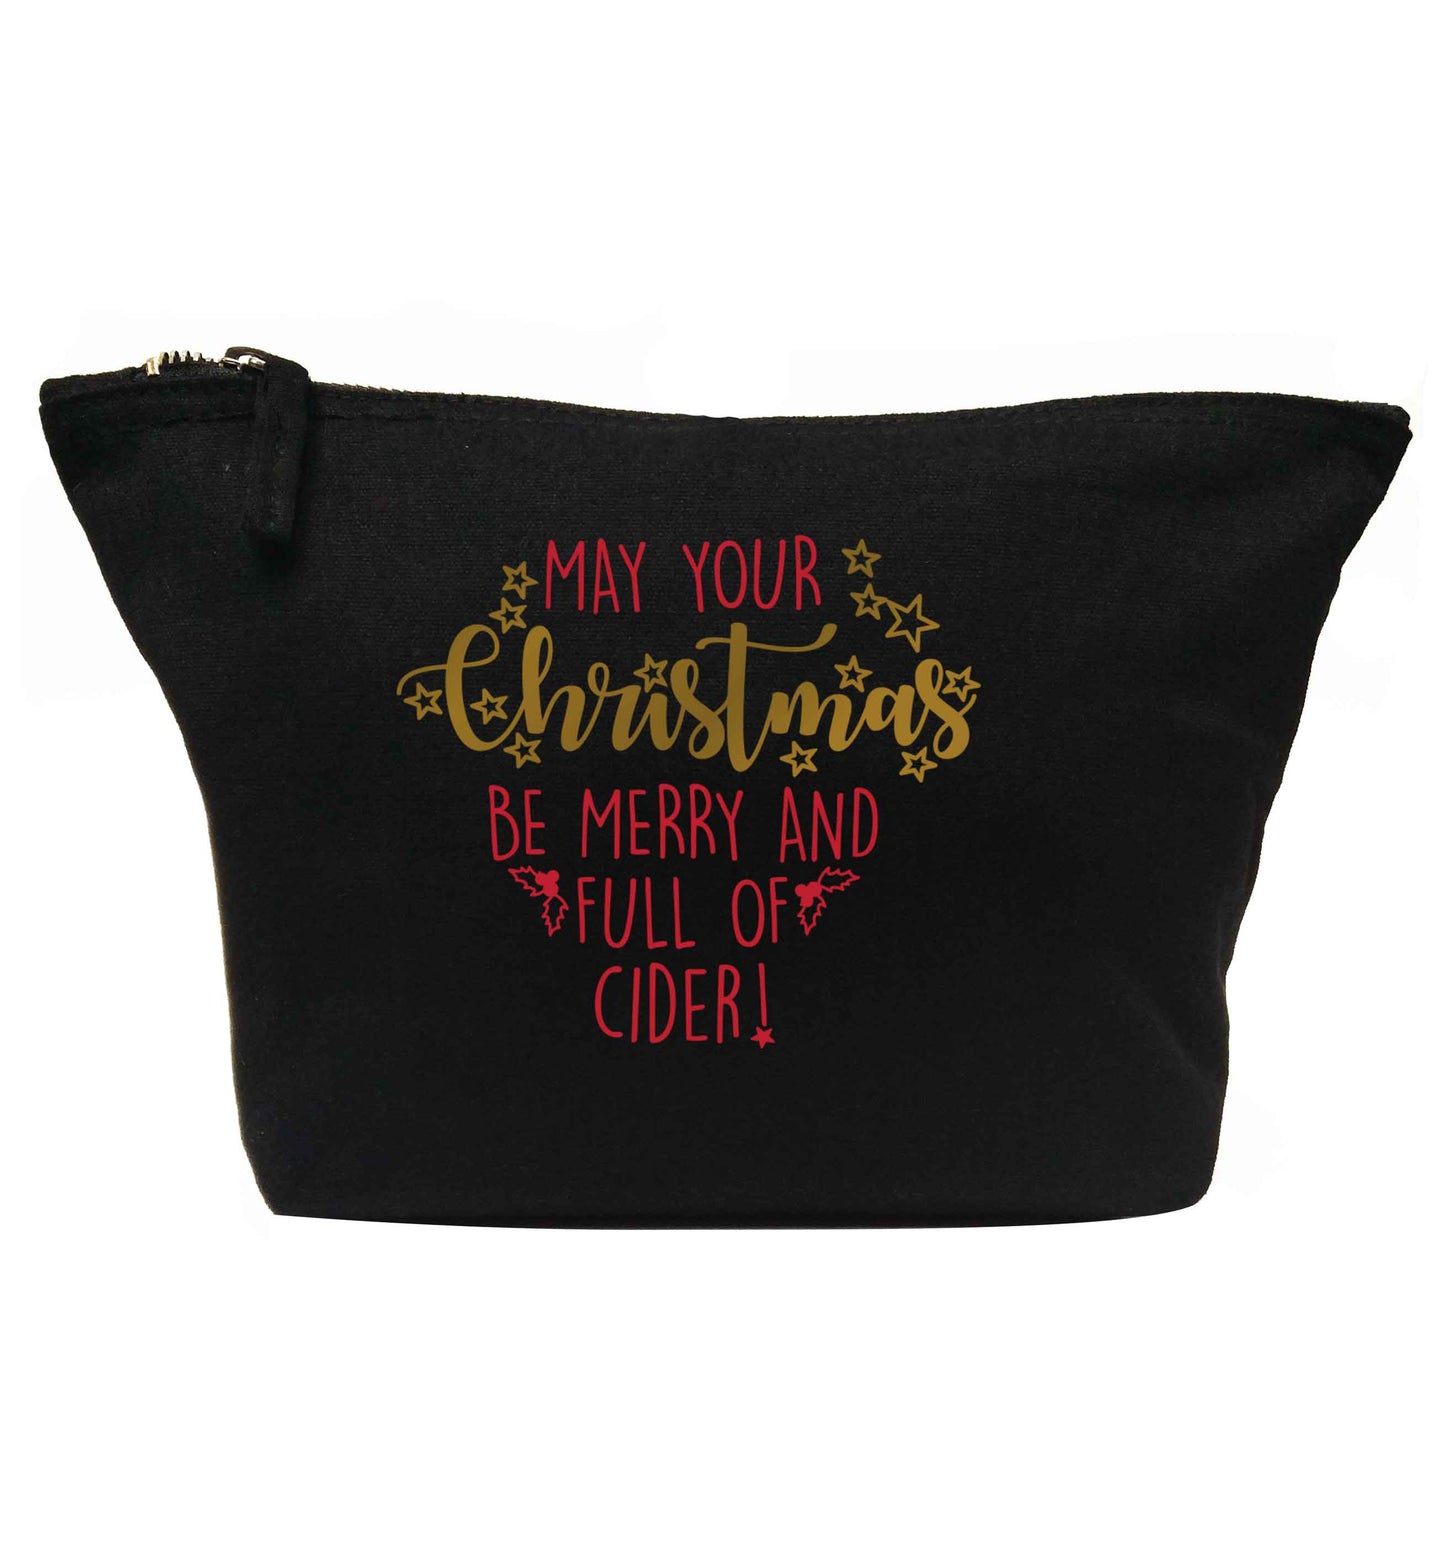 May your Christmas be merry and full of cider | makeup / wash bag